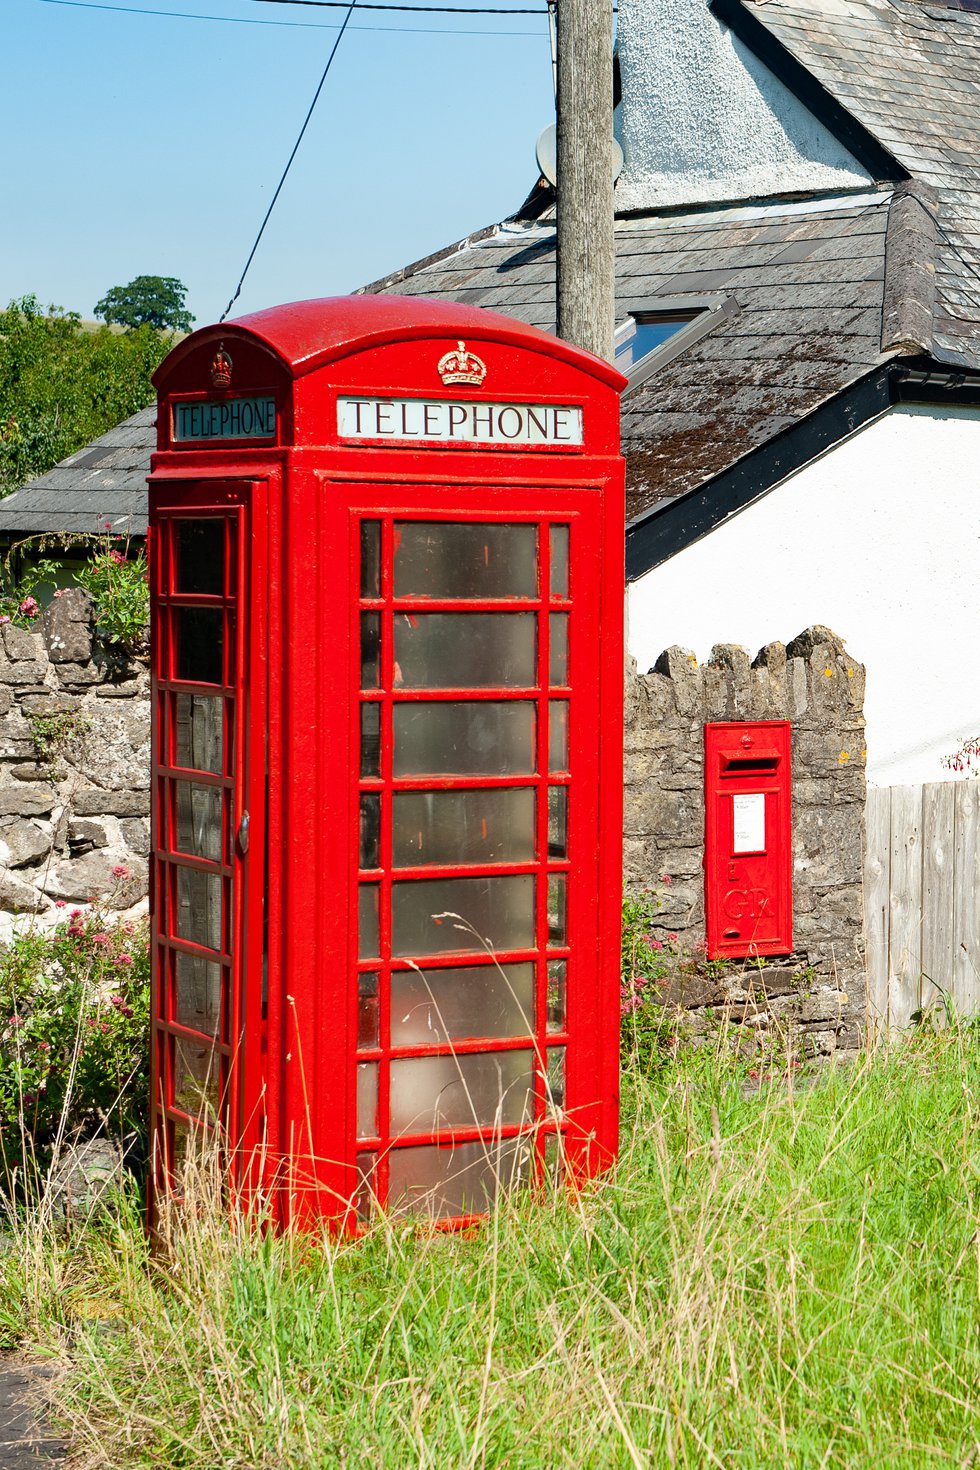 Helen Northcott has photographed Dartmoor's remaining red phone boxes